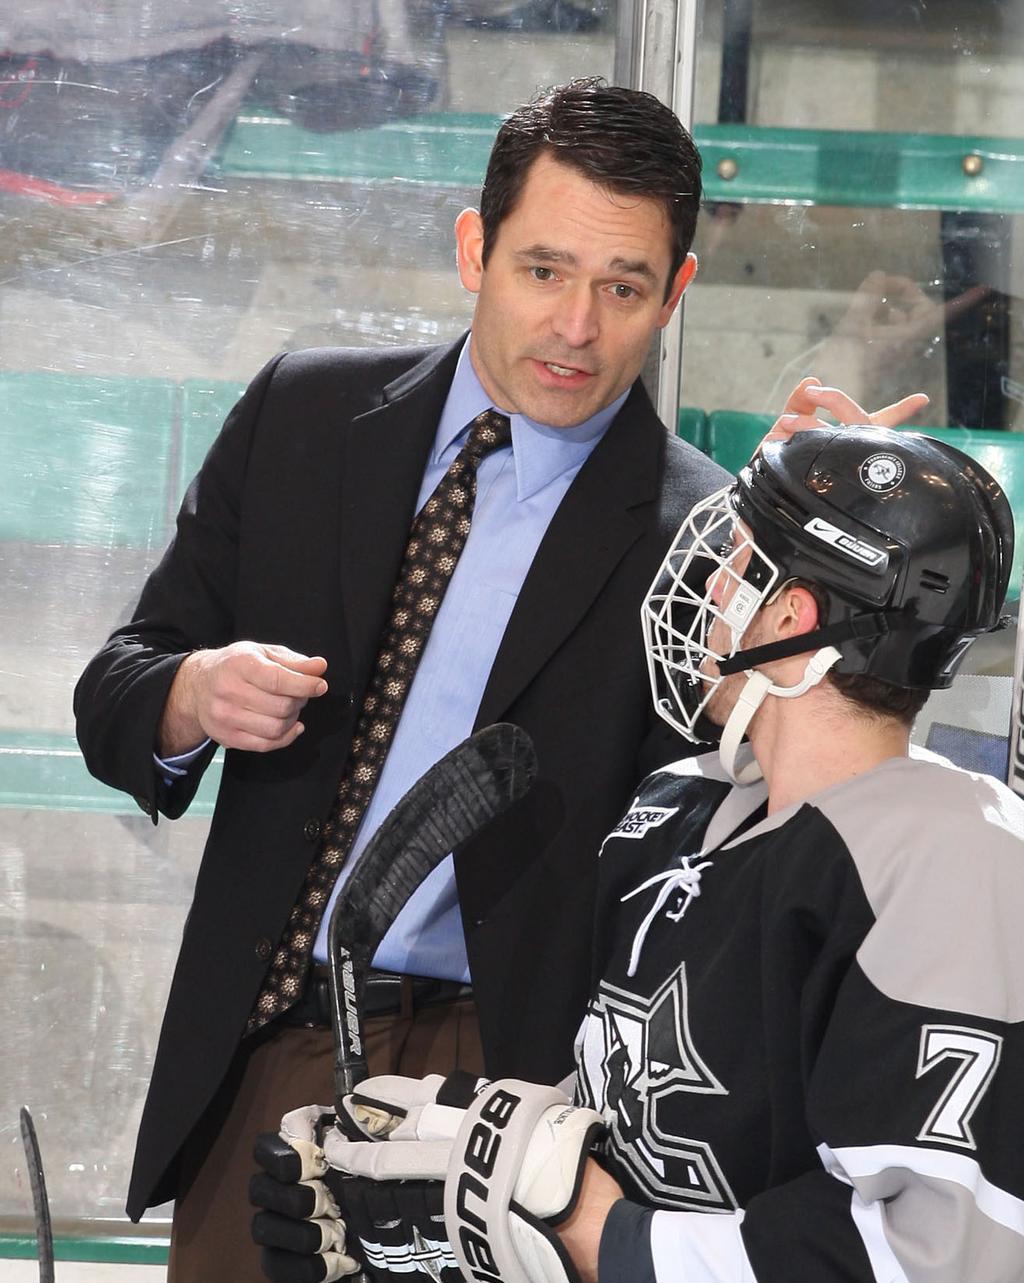 Overall, Berard will enter his 12th-consecutive season at Providence and 14th overall. He served as the associate head coach under Paul Pooley for three seasons. A Coventry, R.I.